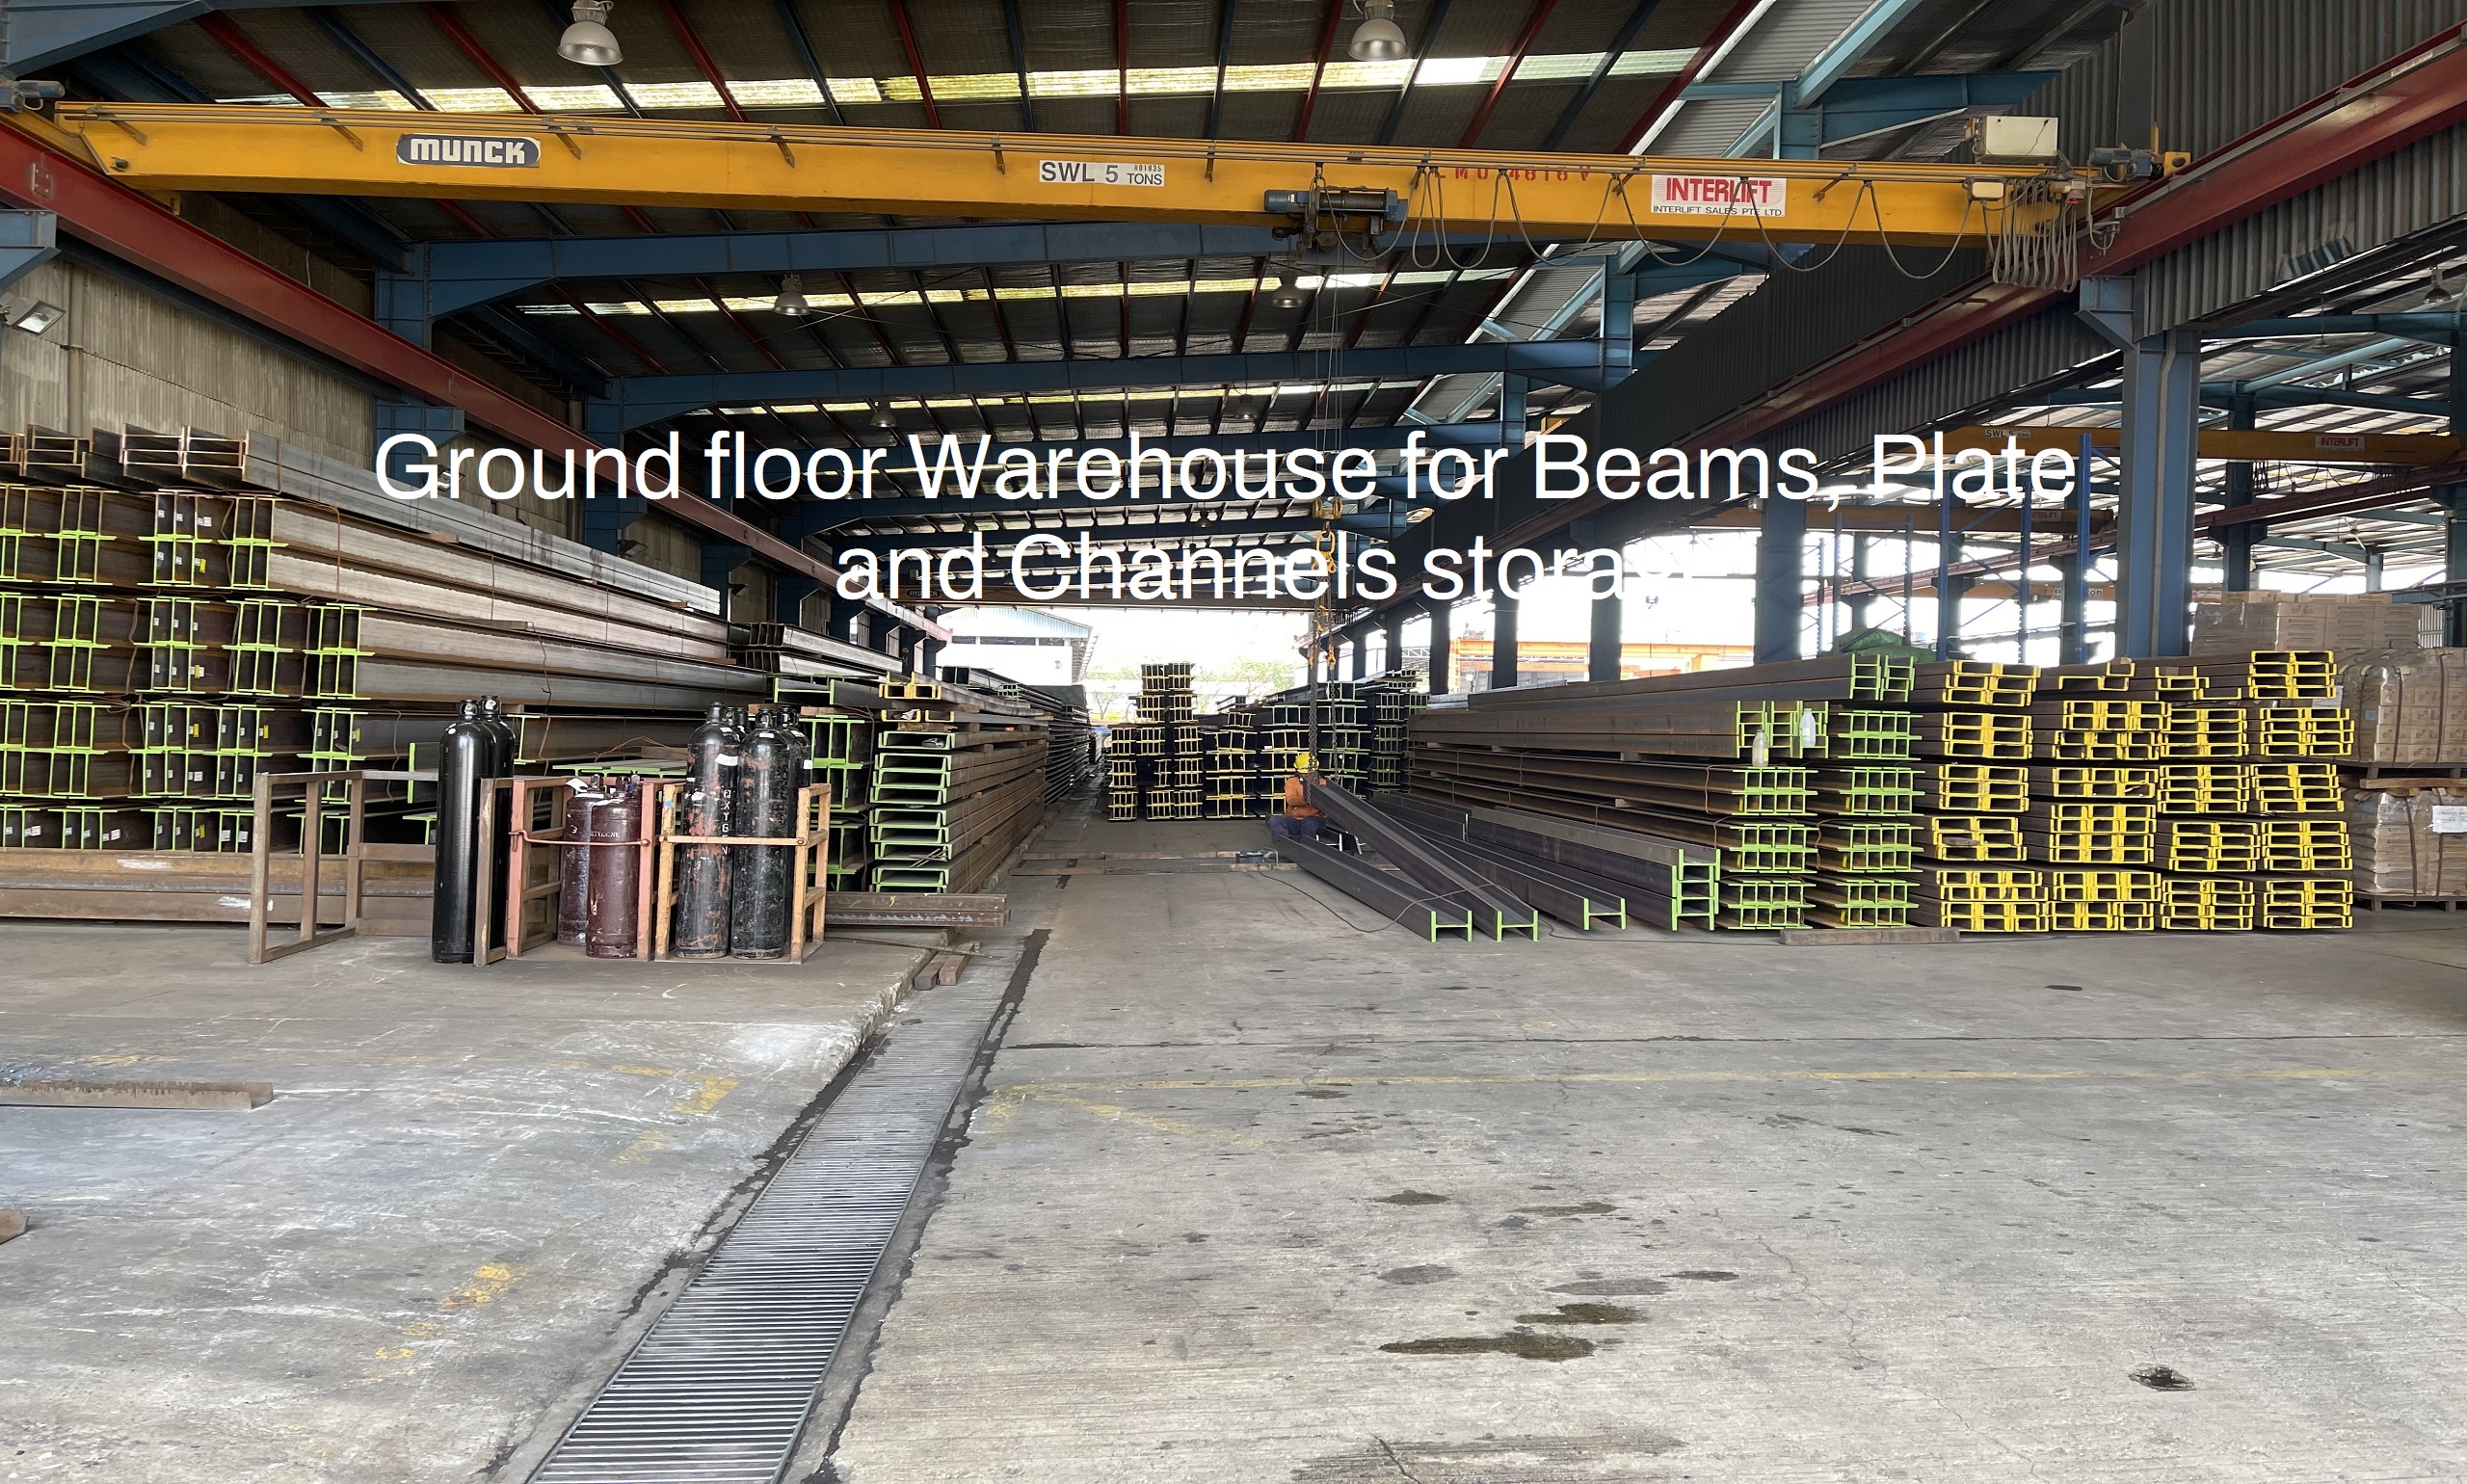 Ground floor Warehouse for Beams, Plate and Channels storage